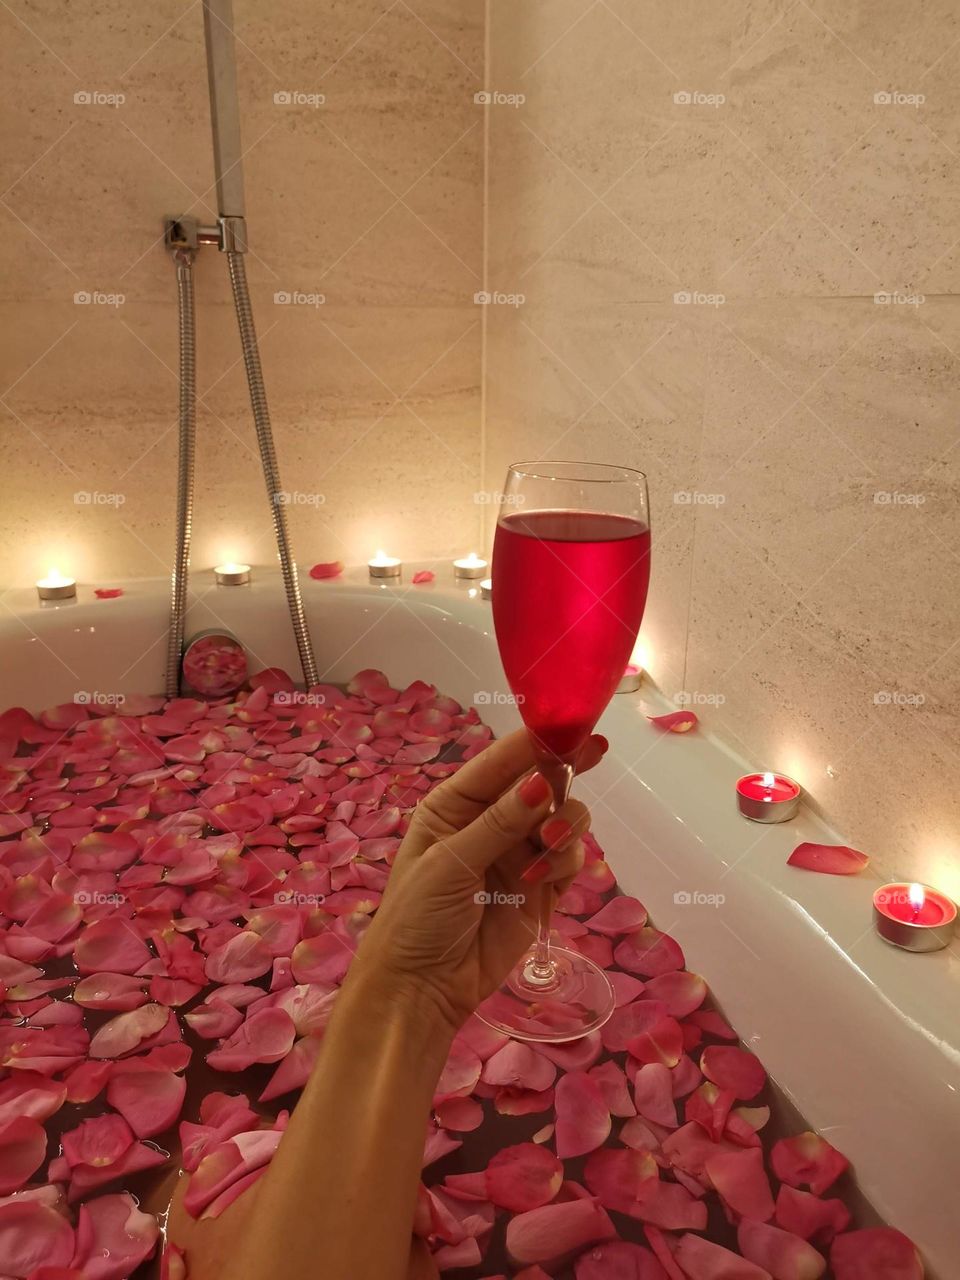 My favorite spot at home is the bathroom. Lovely and romantic place. Bath with rose petals, candles and glass of prosecco.